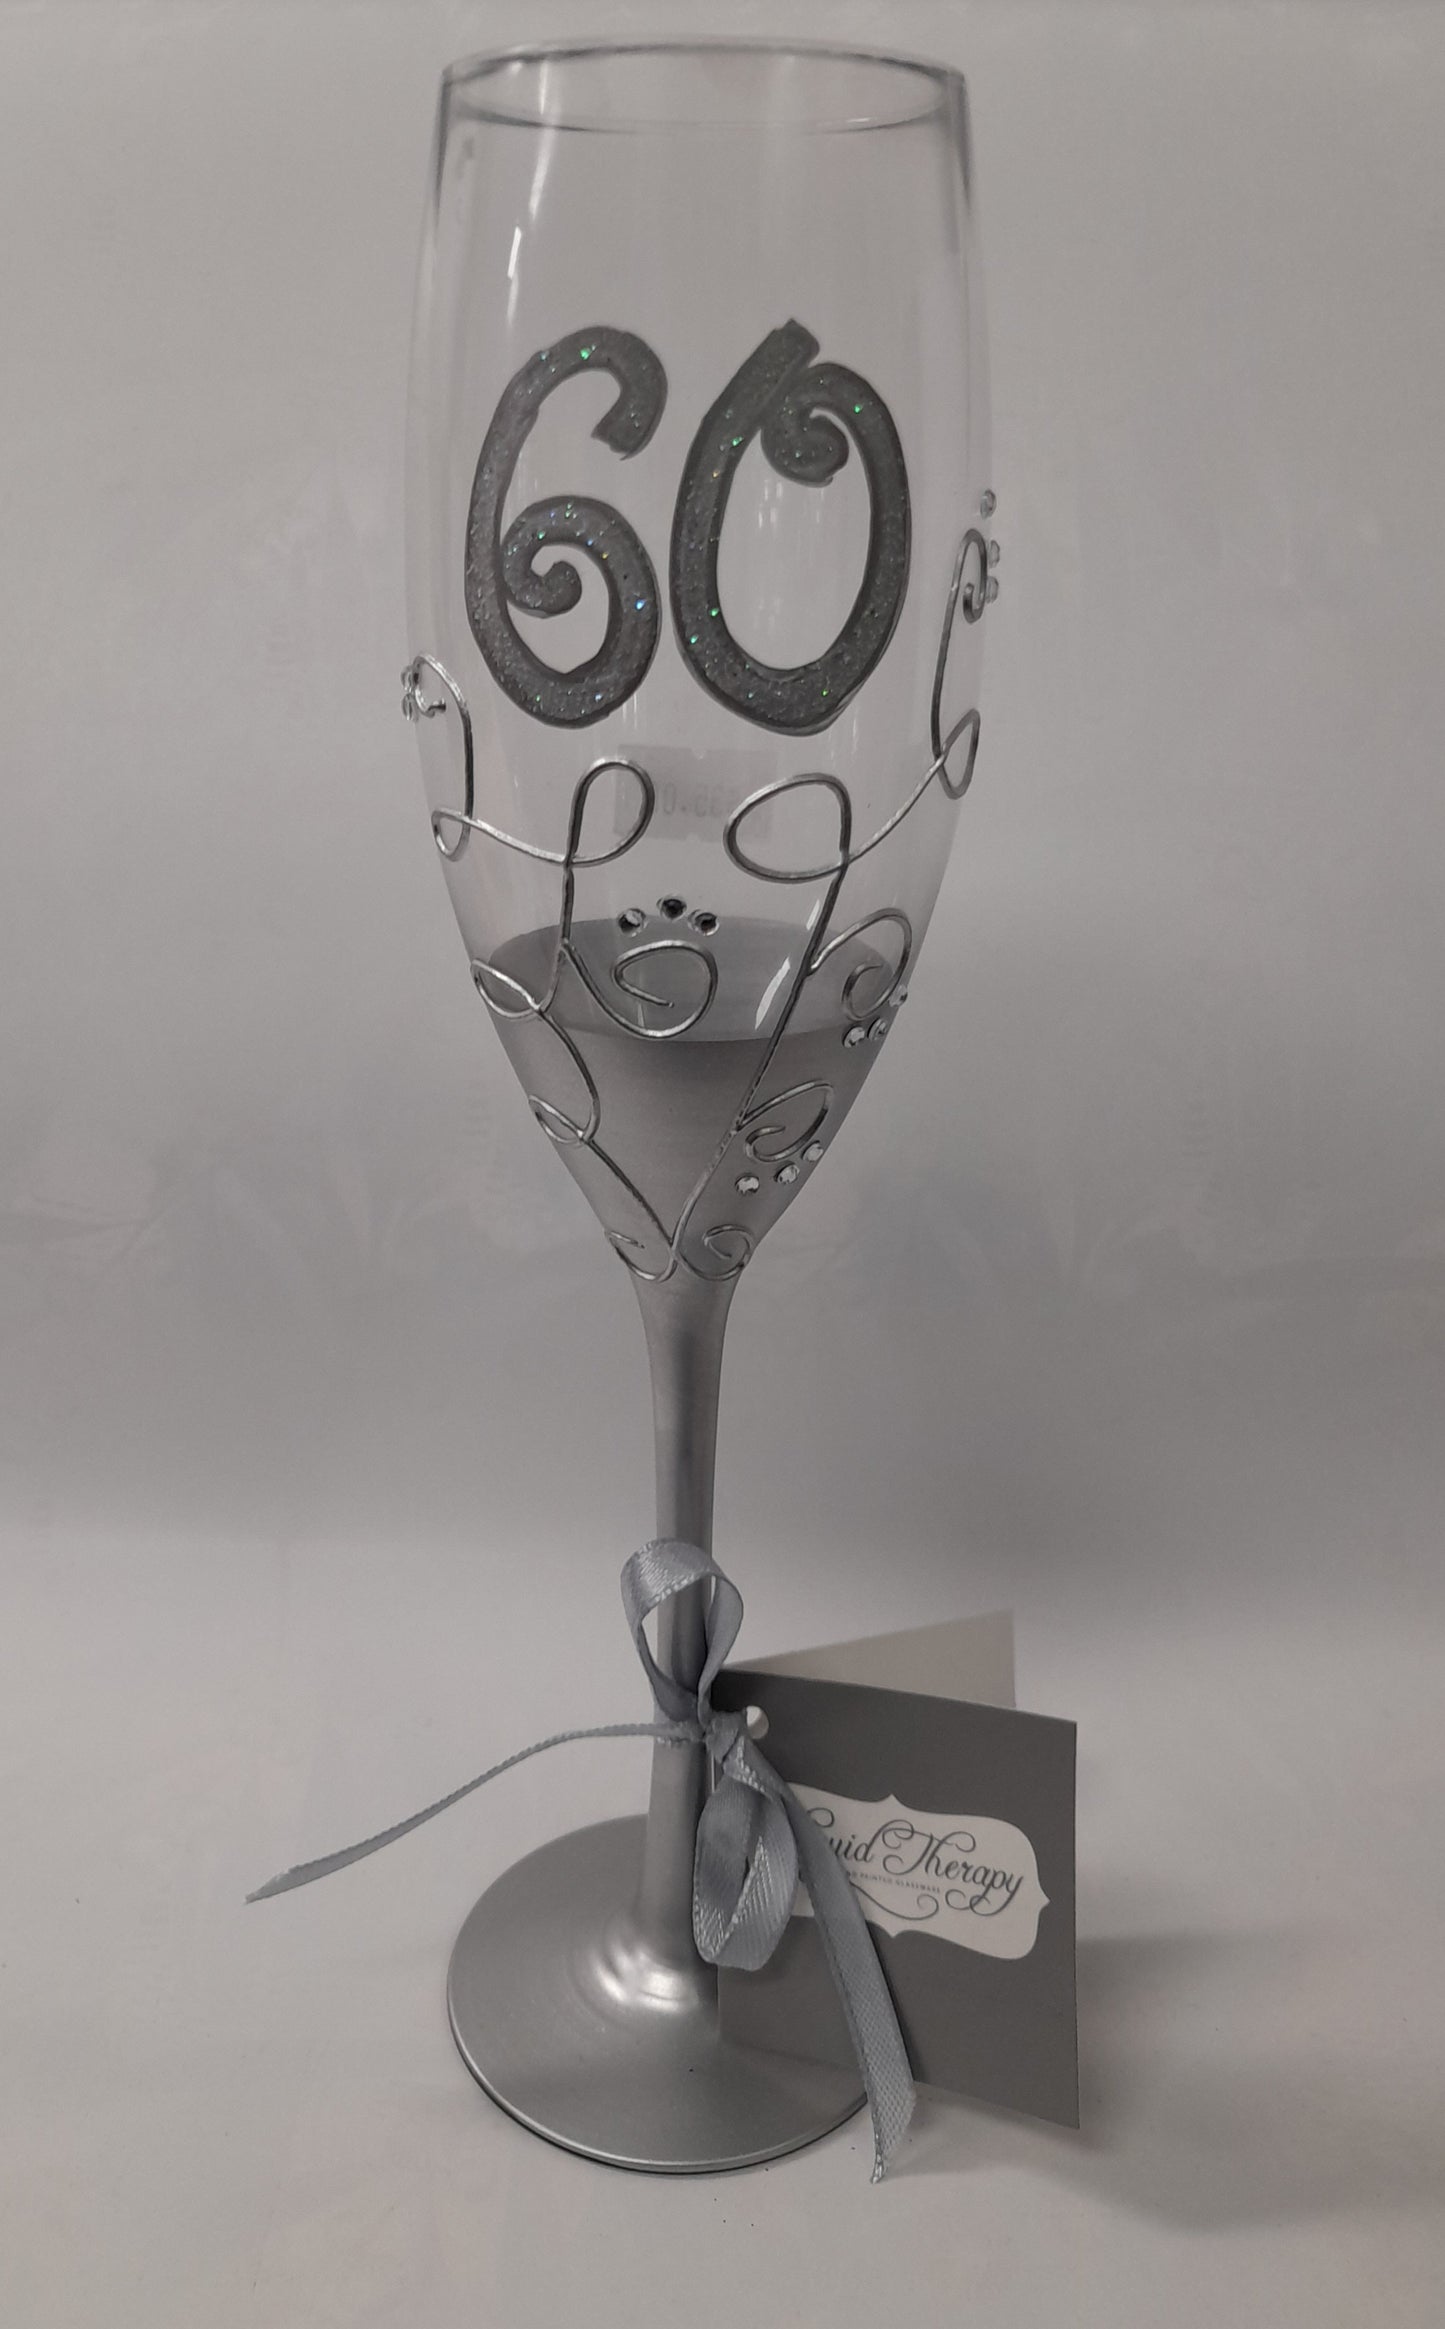 60 Champagne Flute - Hand Painted Silver